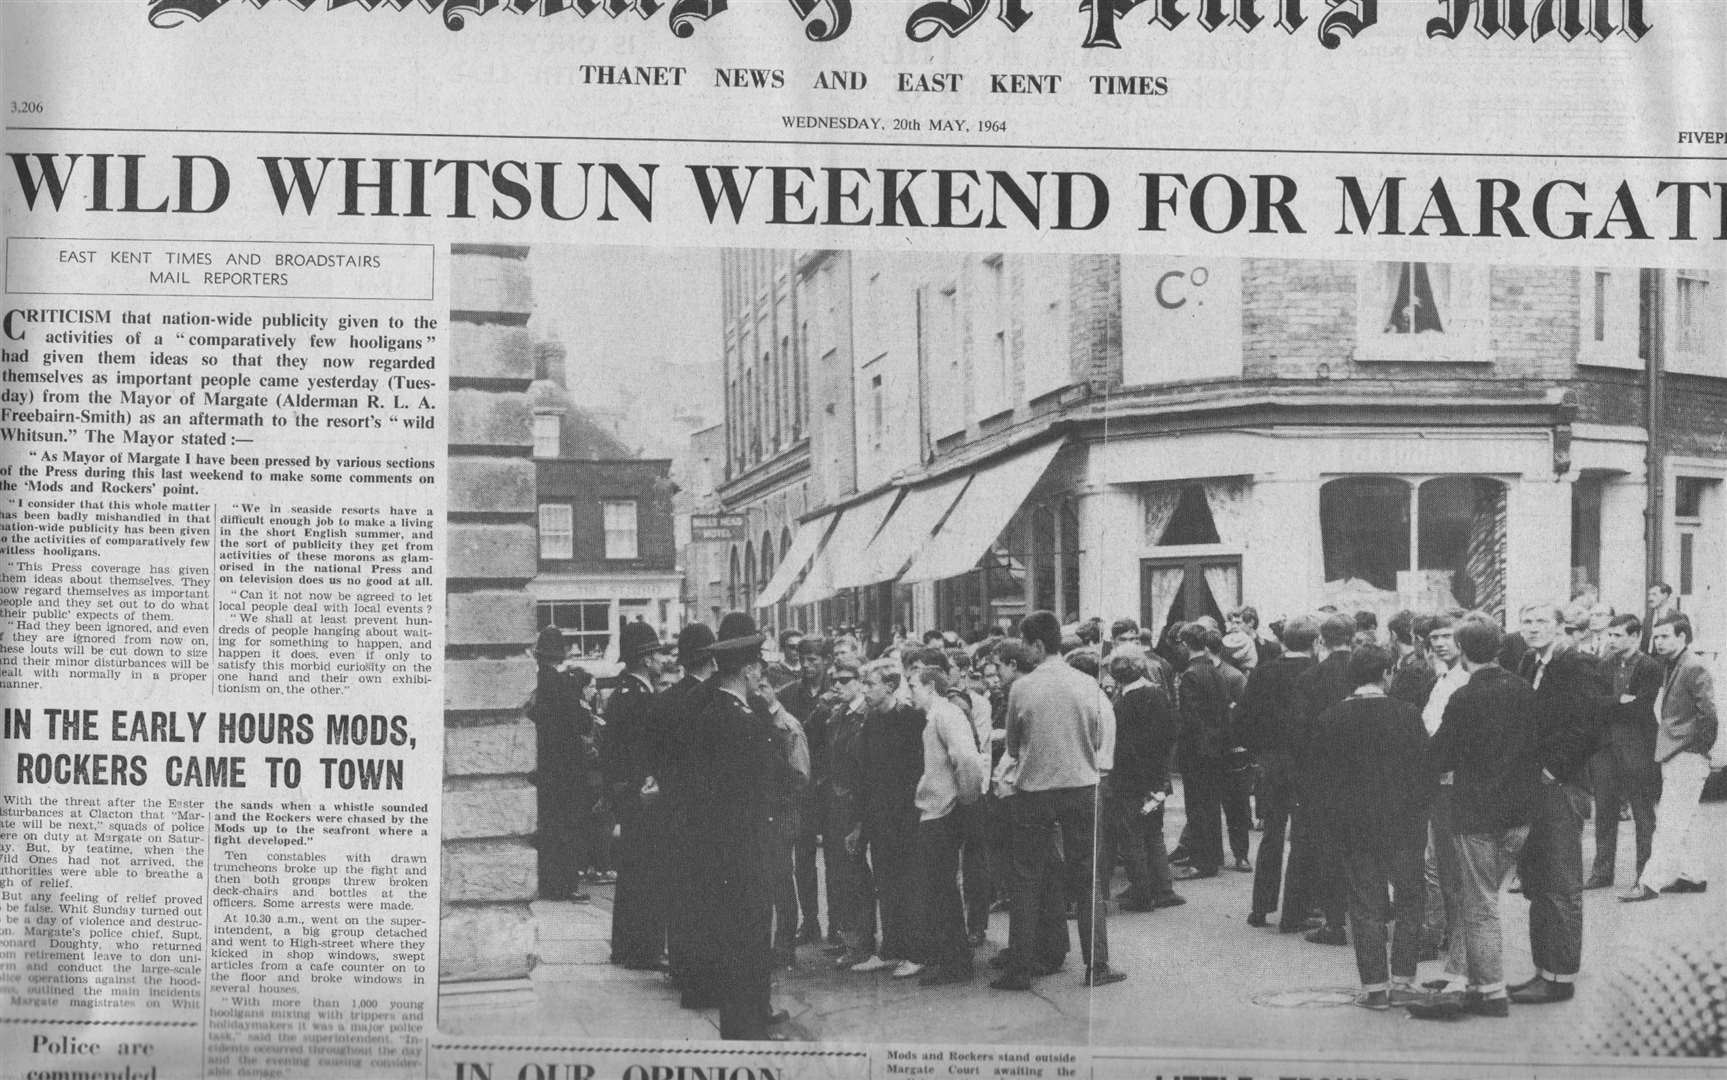 How the local press reported the tensions in the town at the time